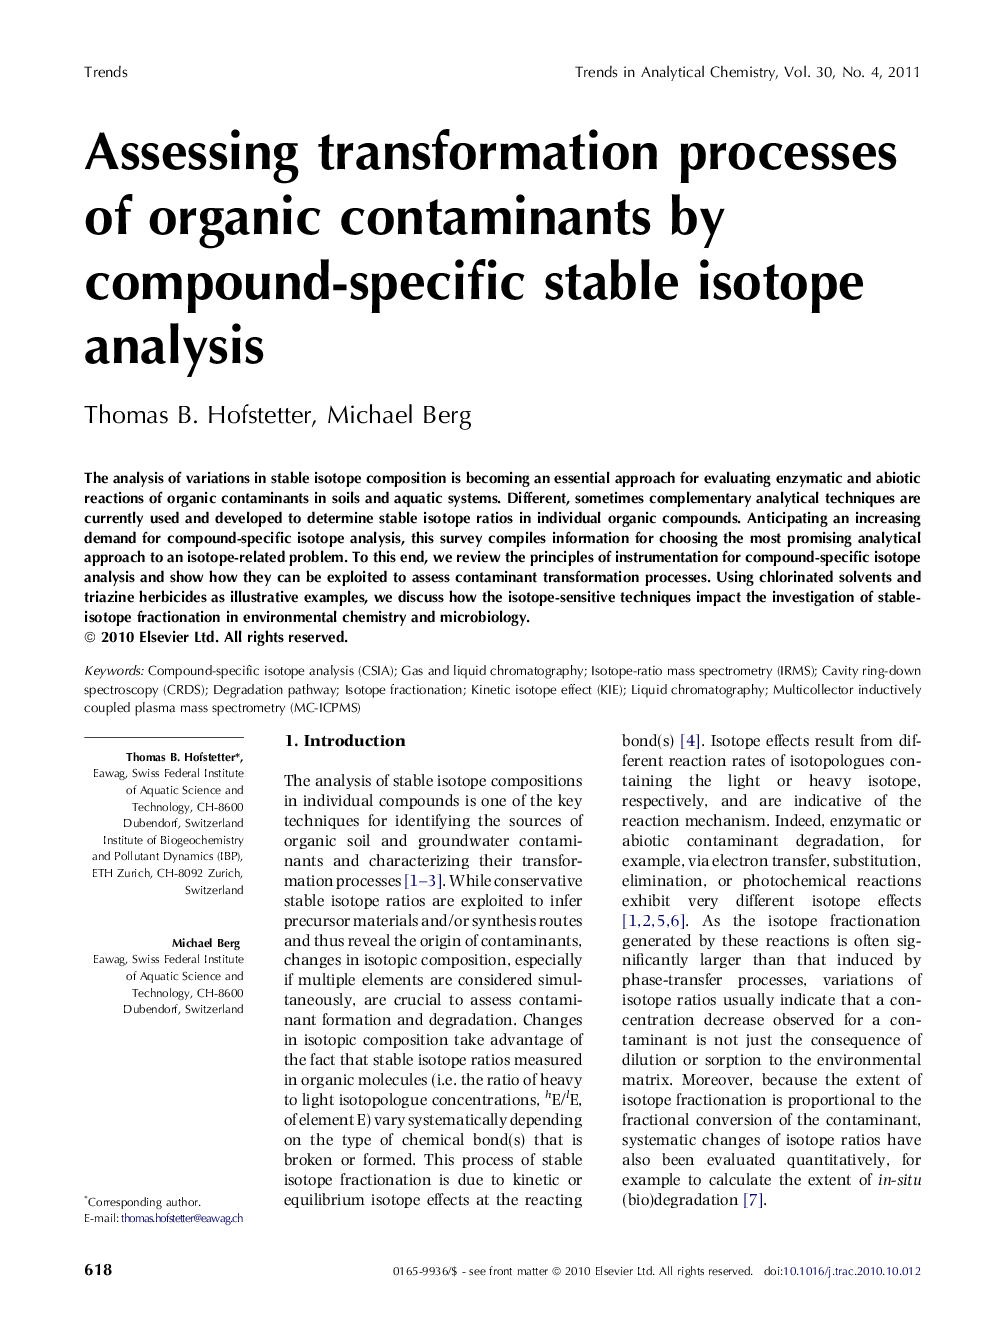 Assessing transformation processes of organic contaminants by compound-specific stable isotope analysis